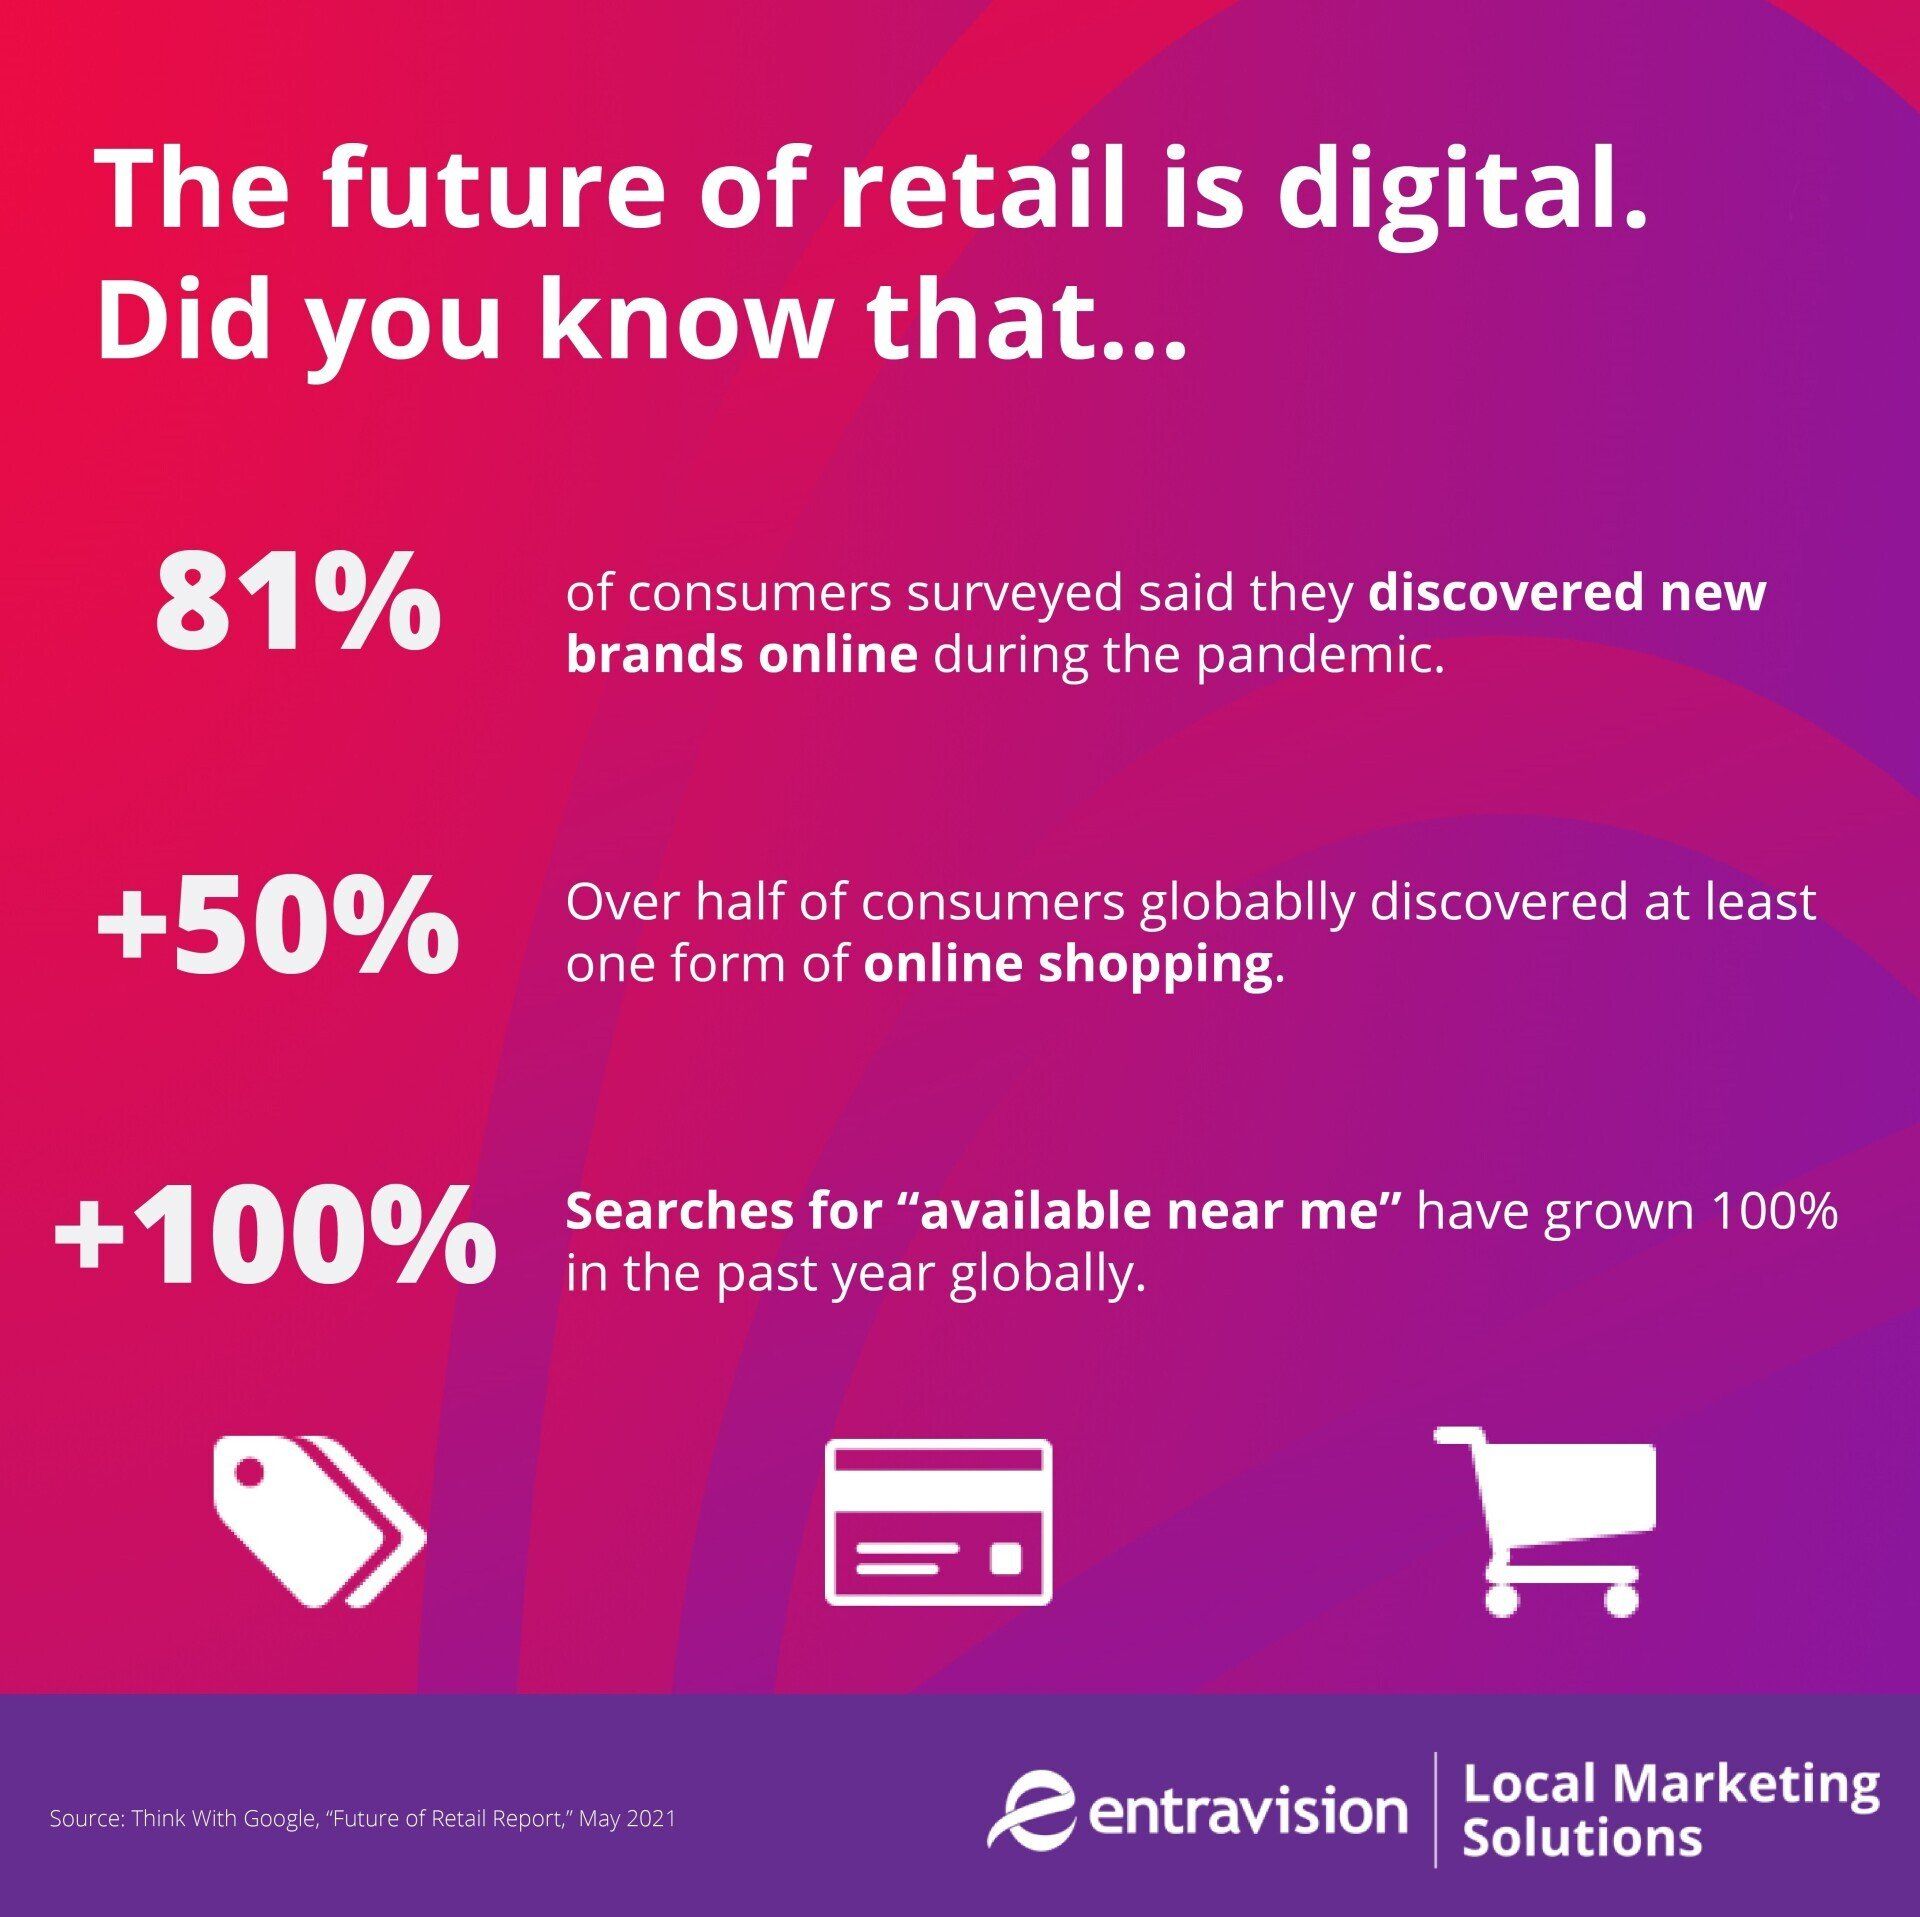 An infographic shows the power of digital and digital marketing when it comes to the direction retail is headed in.